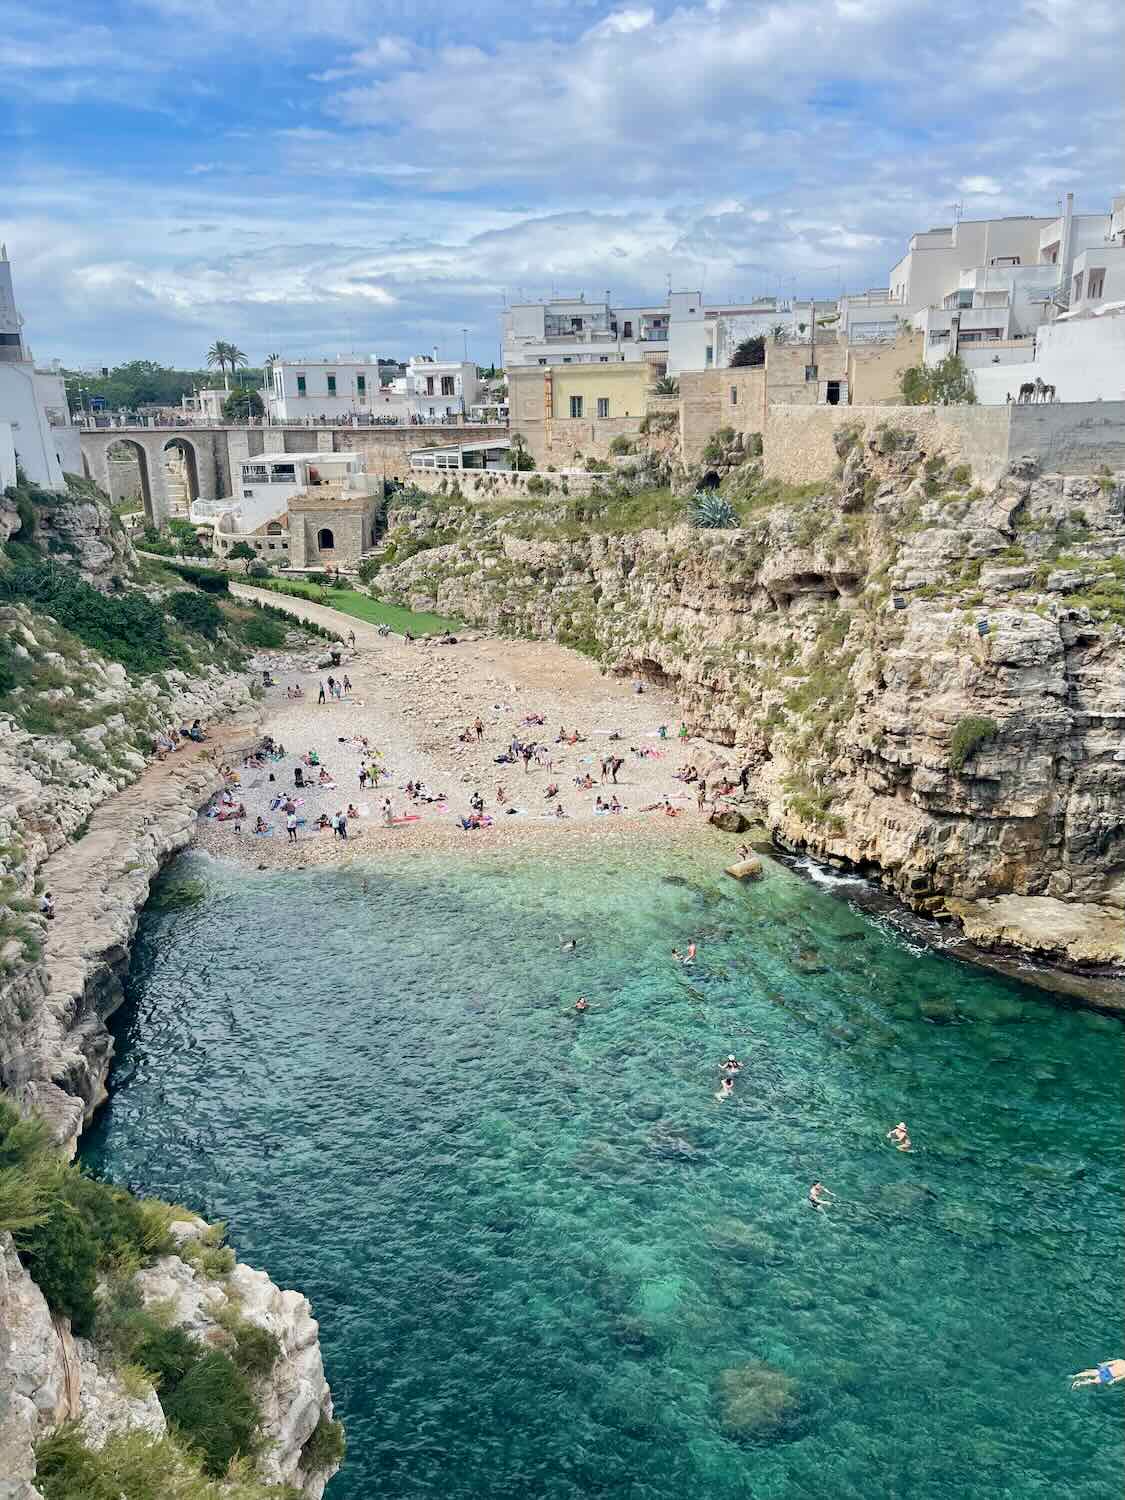 A scenic photo of Polignano a Mare, Italy. The image captures a beach nestled between rocky cliffs with turquoise waters. People are swimming and sunbathing on the beach. The town with its white buildings and historic structures is visible in the background under a partly cloudy sky.